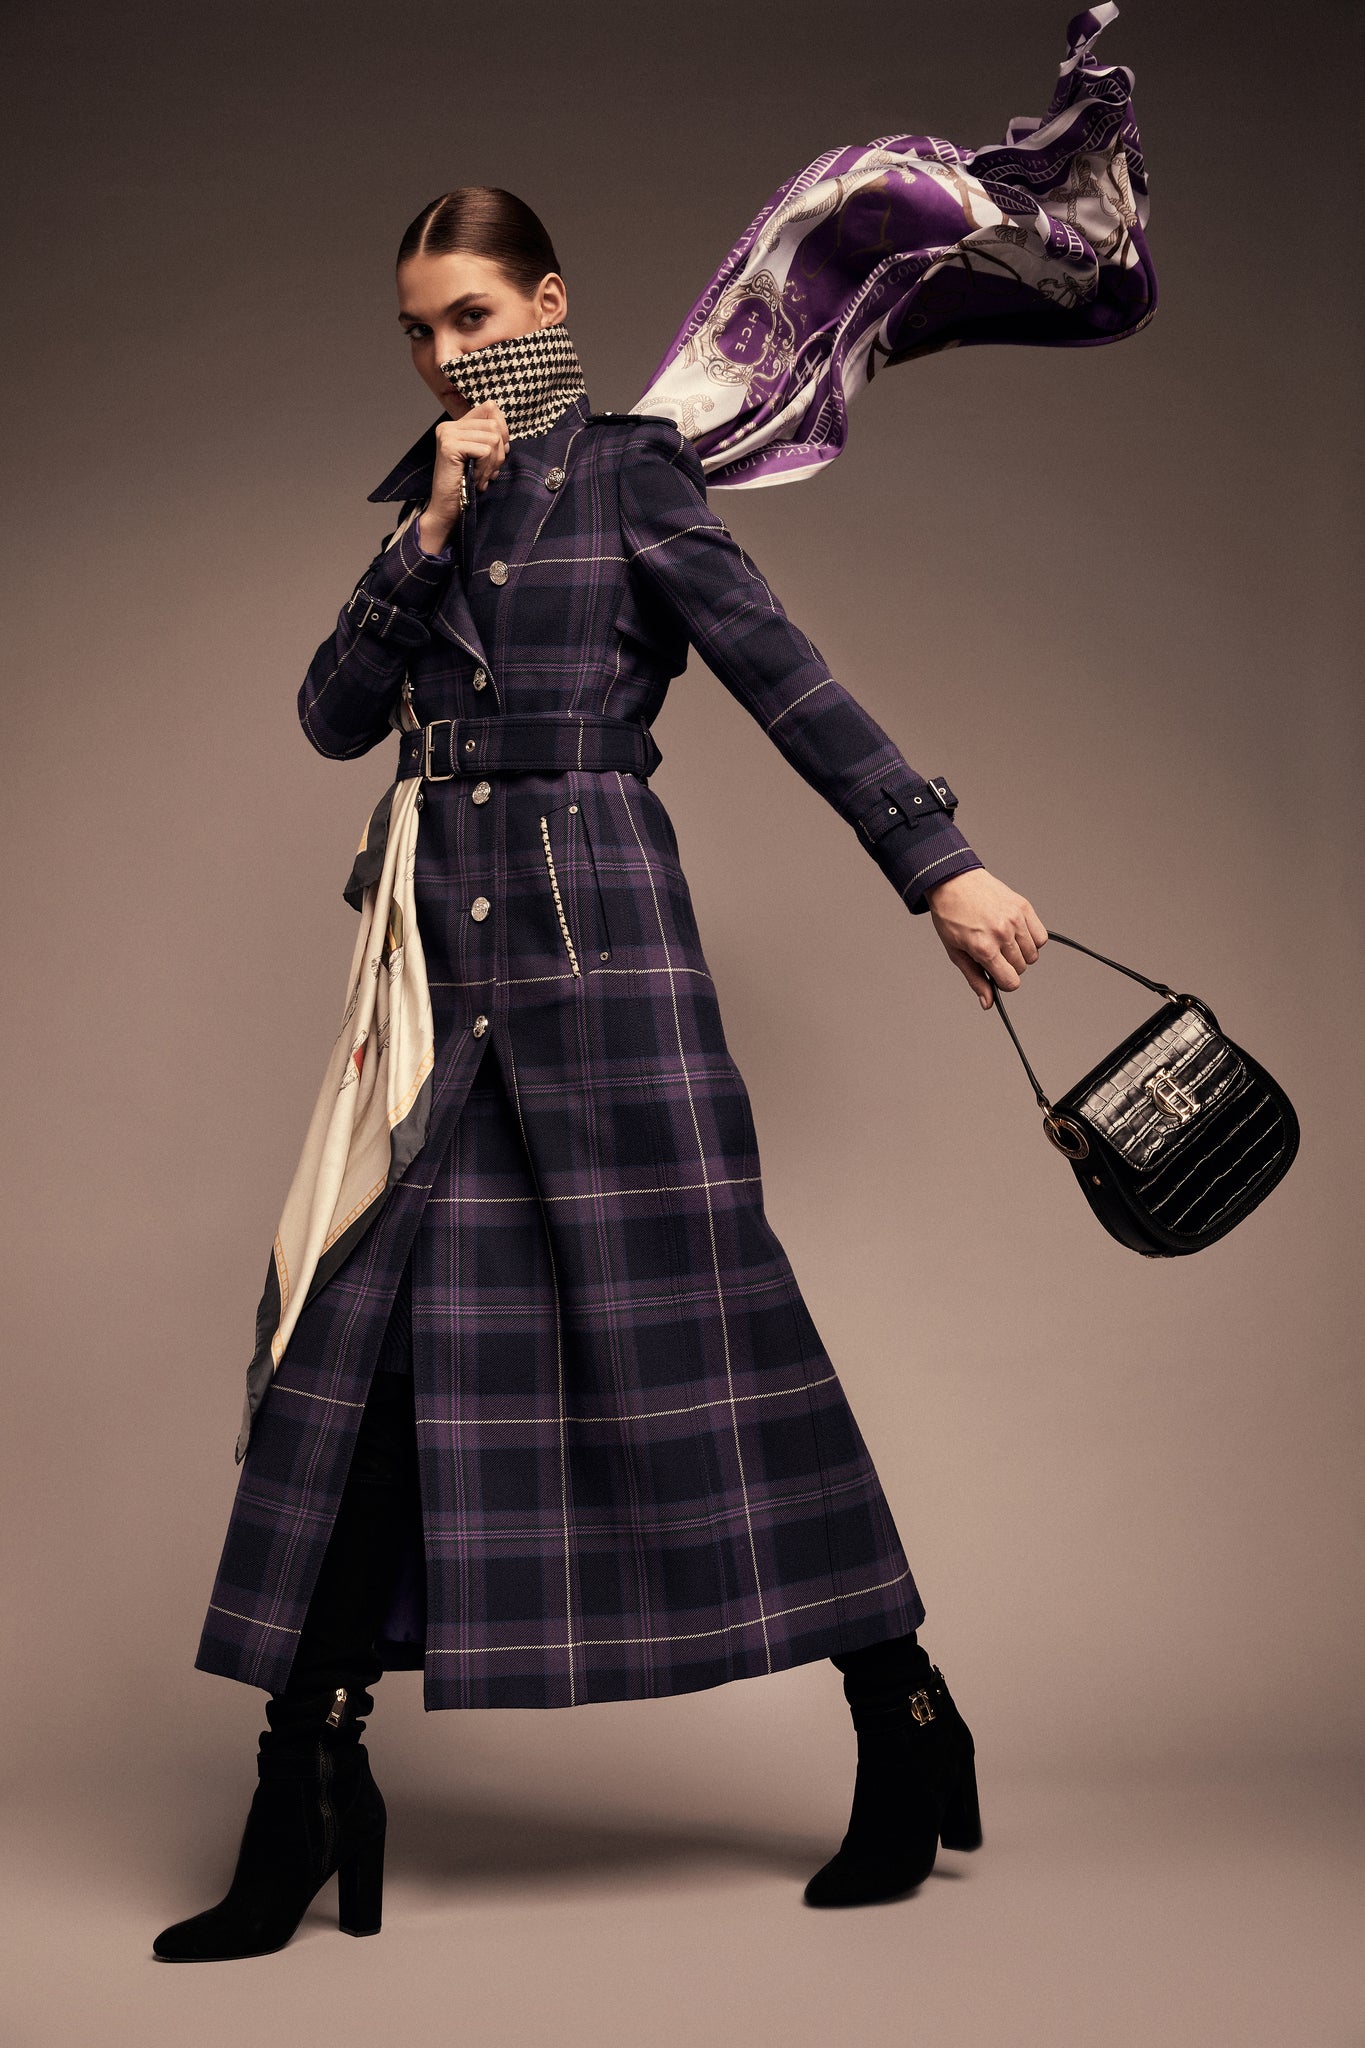 Model wearing purple tartan trench coat with silver buttons, flying purple silk scarf from neck and black croc saddle bag